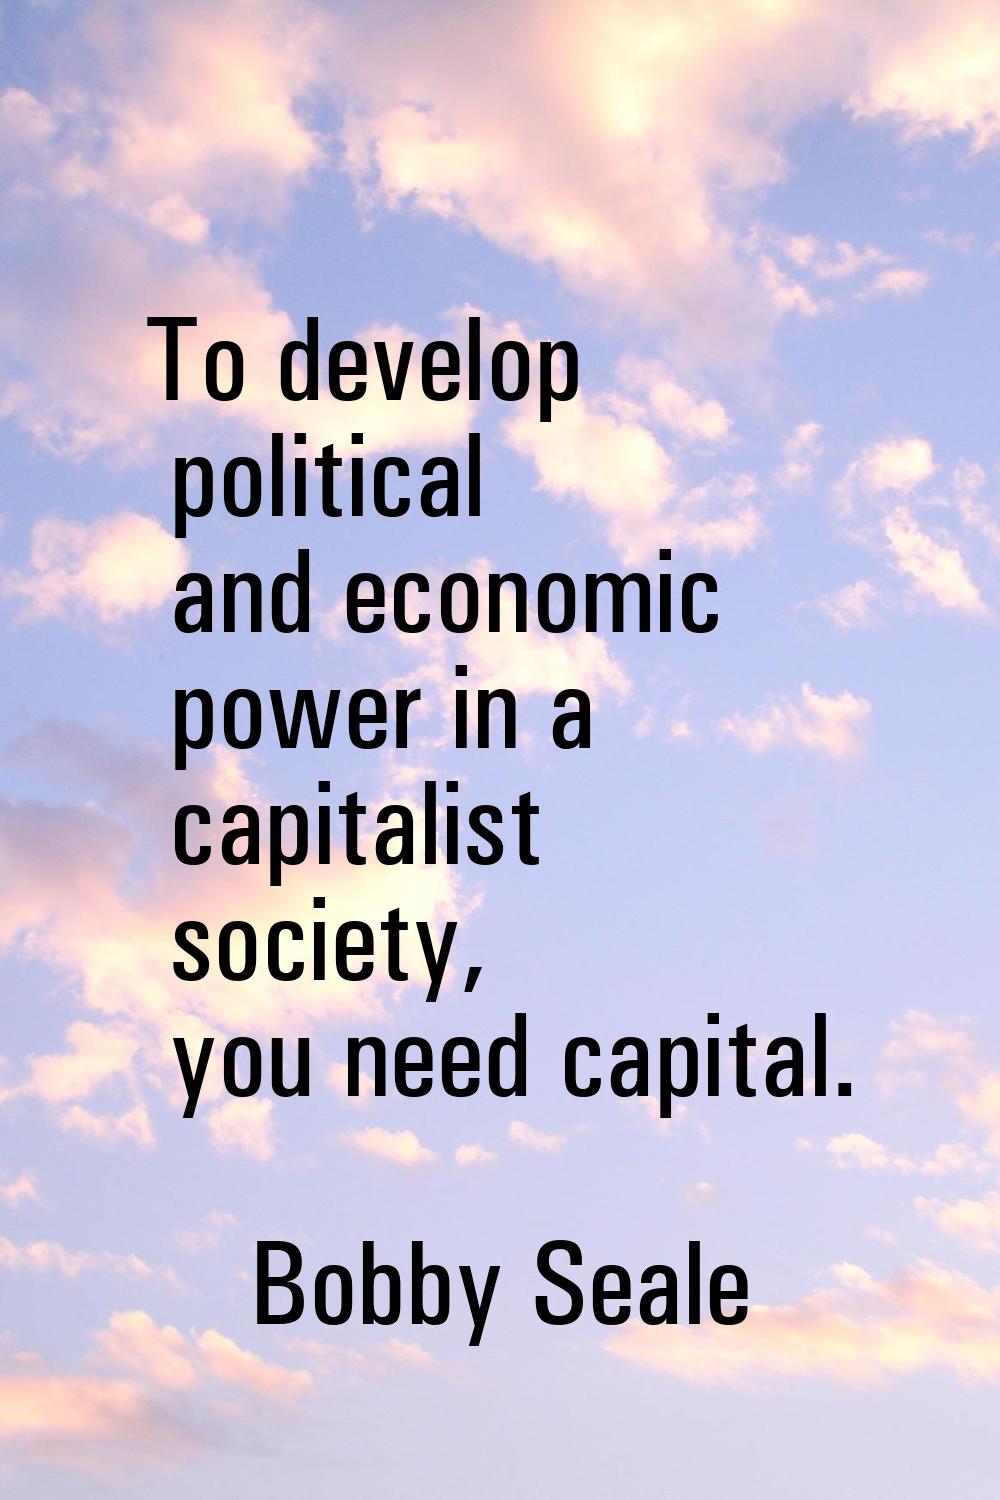 To develop political and economic power in a capitalist society, you need capital.